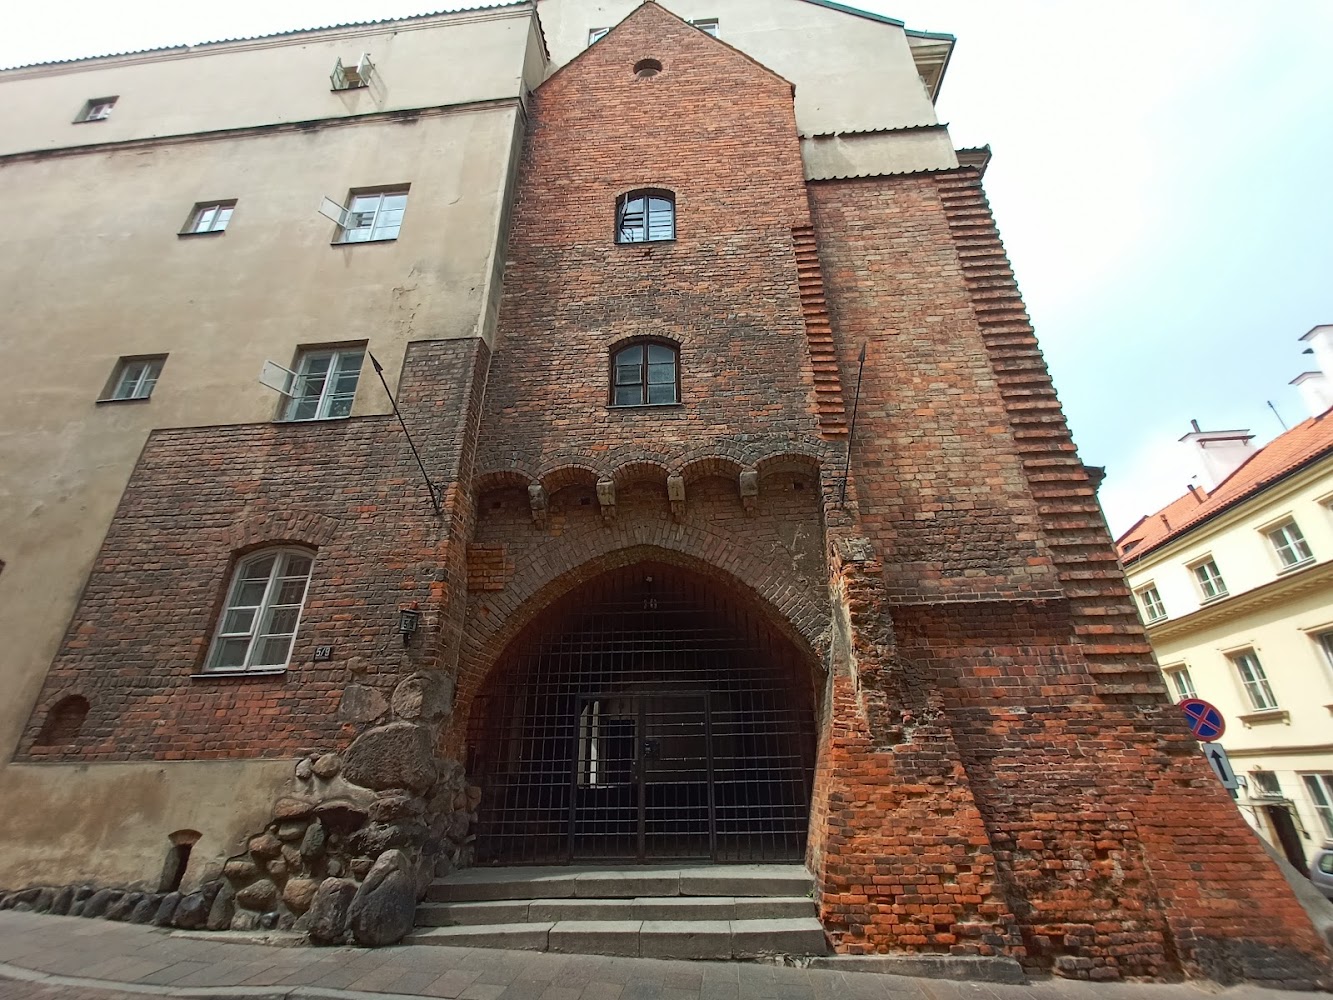 Monument Interpretation Center, branch of the Museum of Warsaw